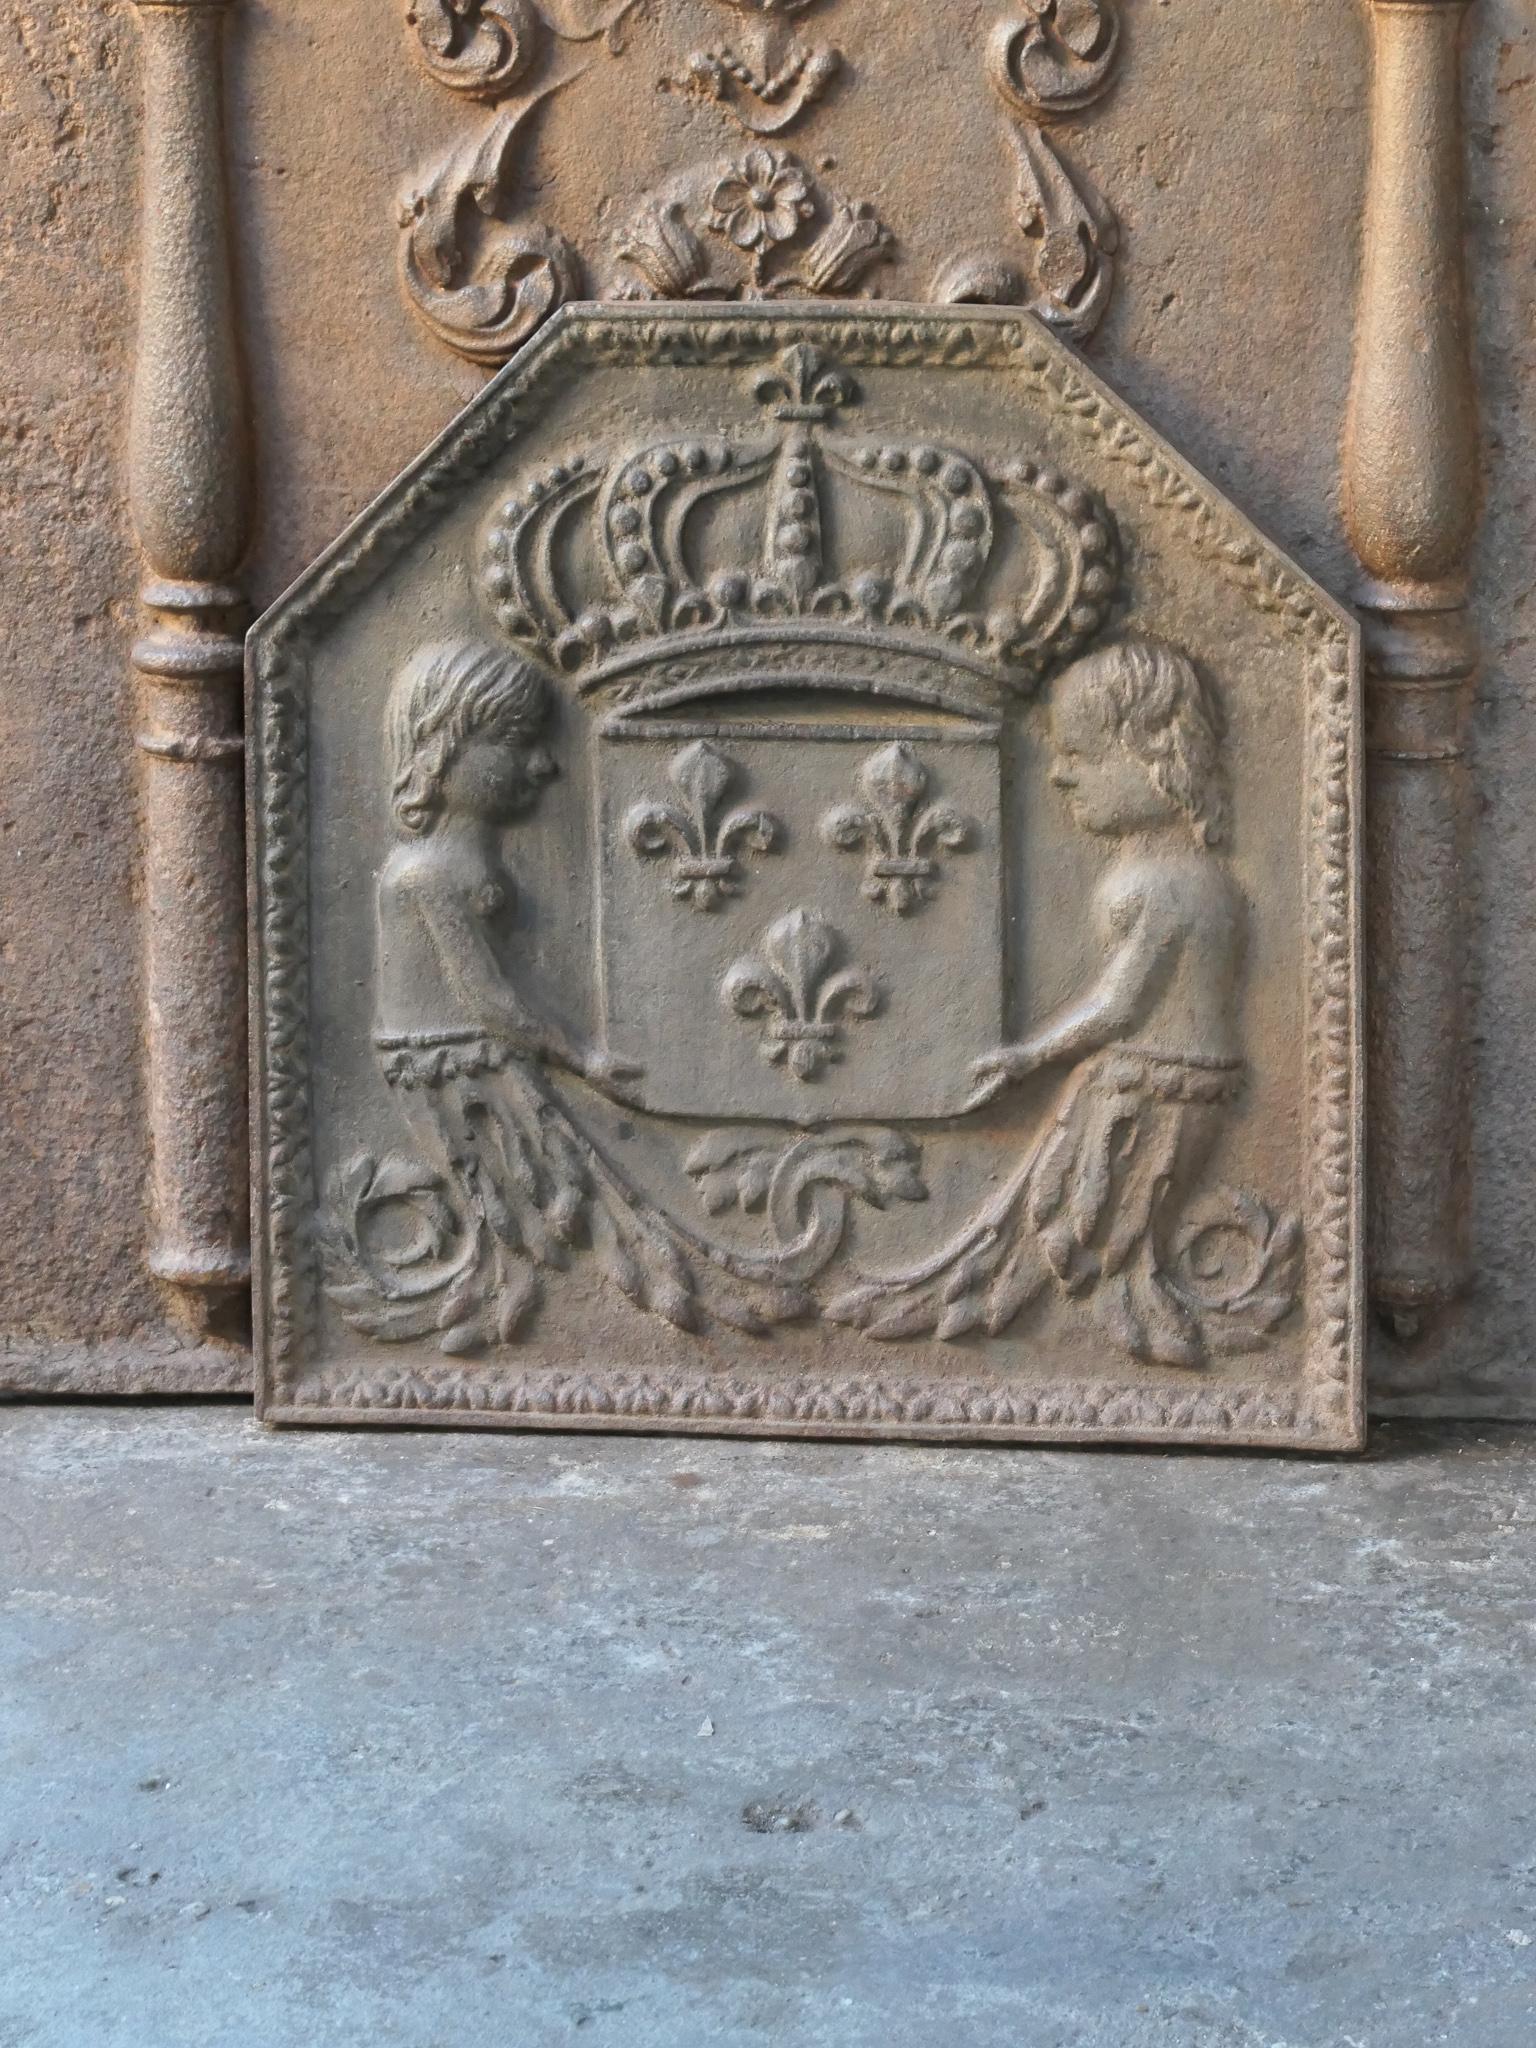 20th century French Renaissance style fireback with the Arms of France. A Coat of Arms of the House of Bourbon, an originally French royal house that became a major dynasty in Europe. The house delivered kings for Spain (Navarra), France, both